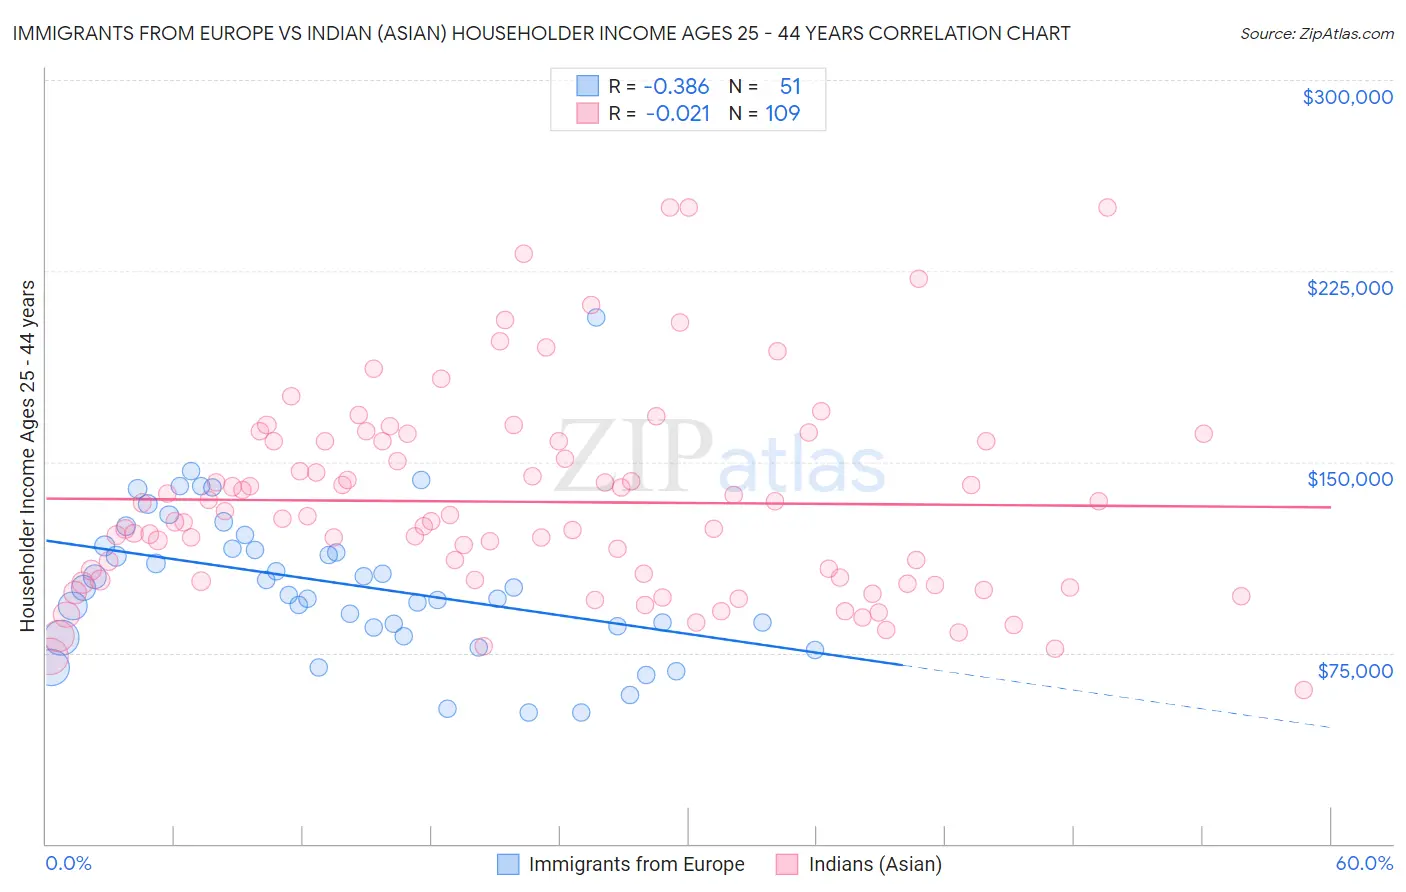 Immigrants from Europe vs Indian (Asian) Householder Income Ages 25 - 44 years